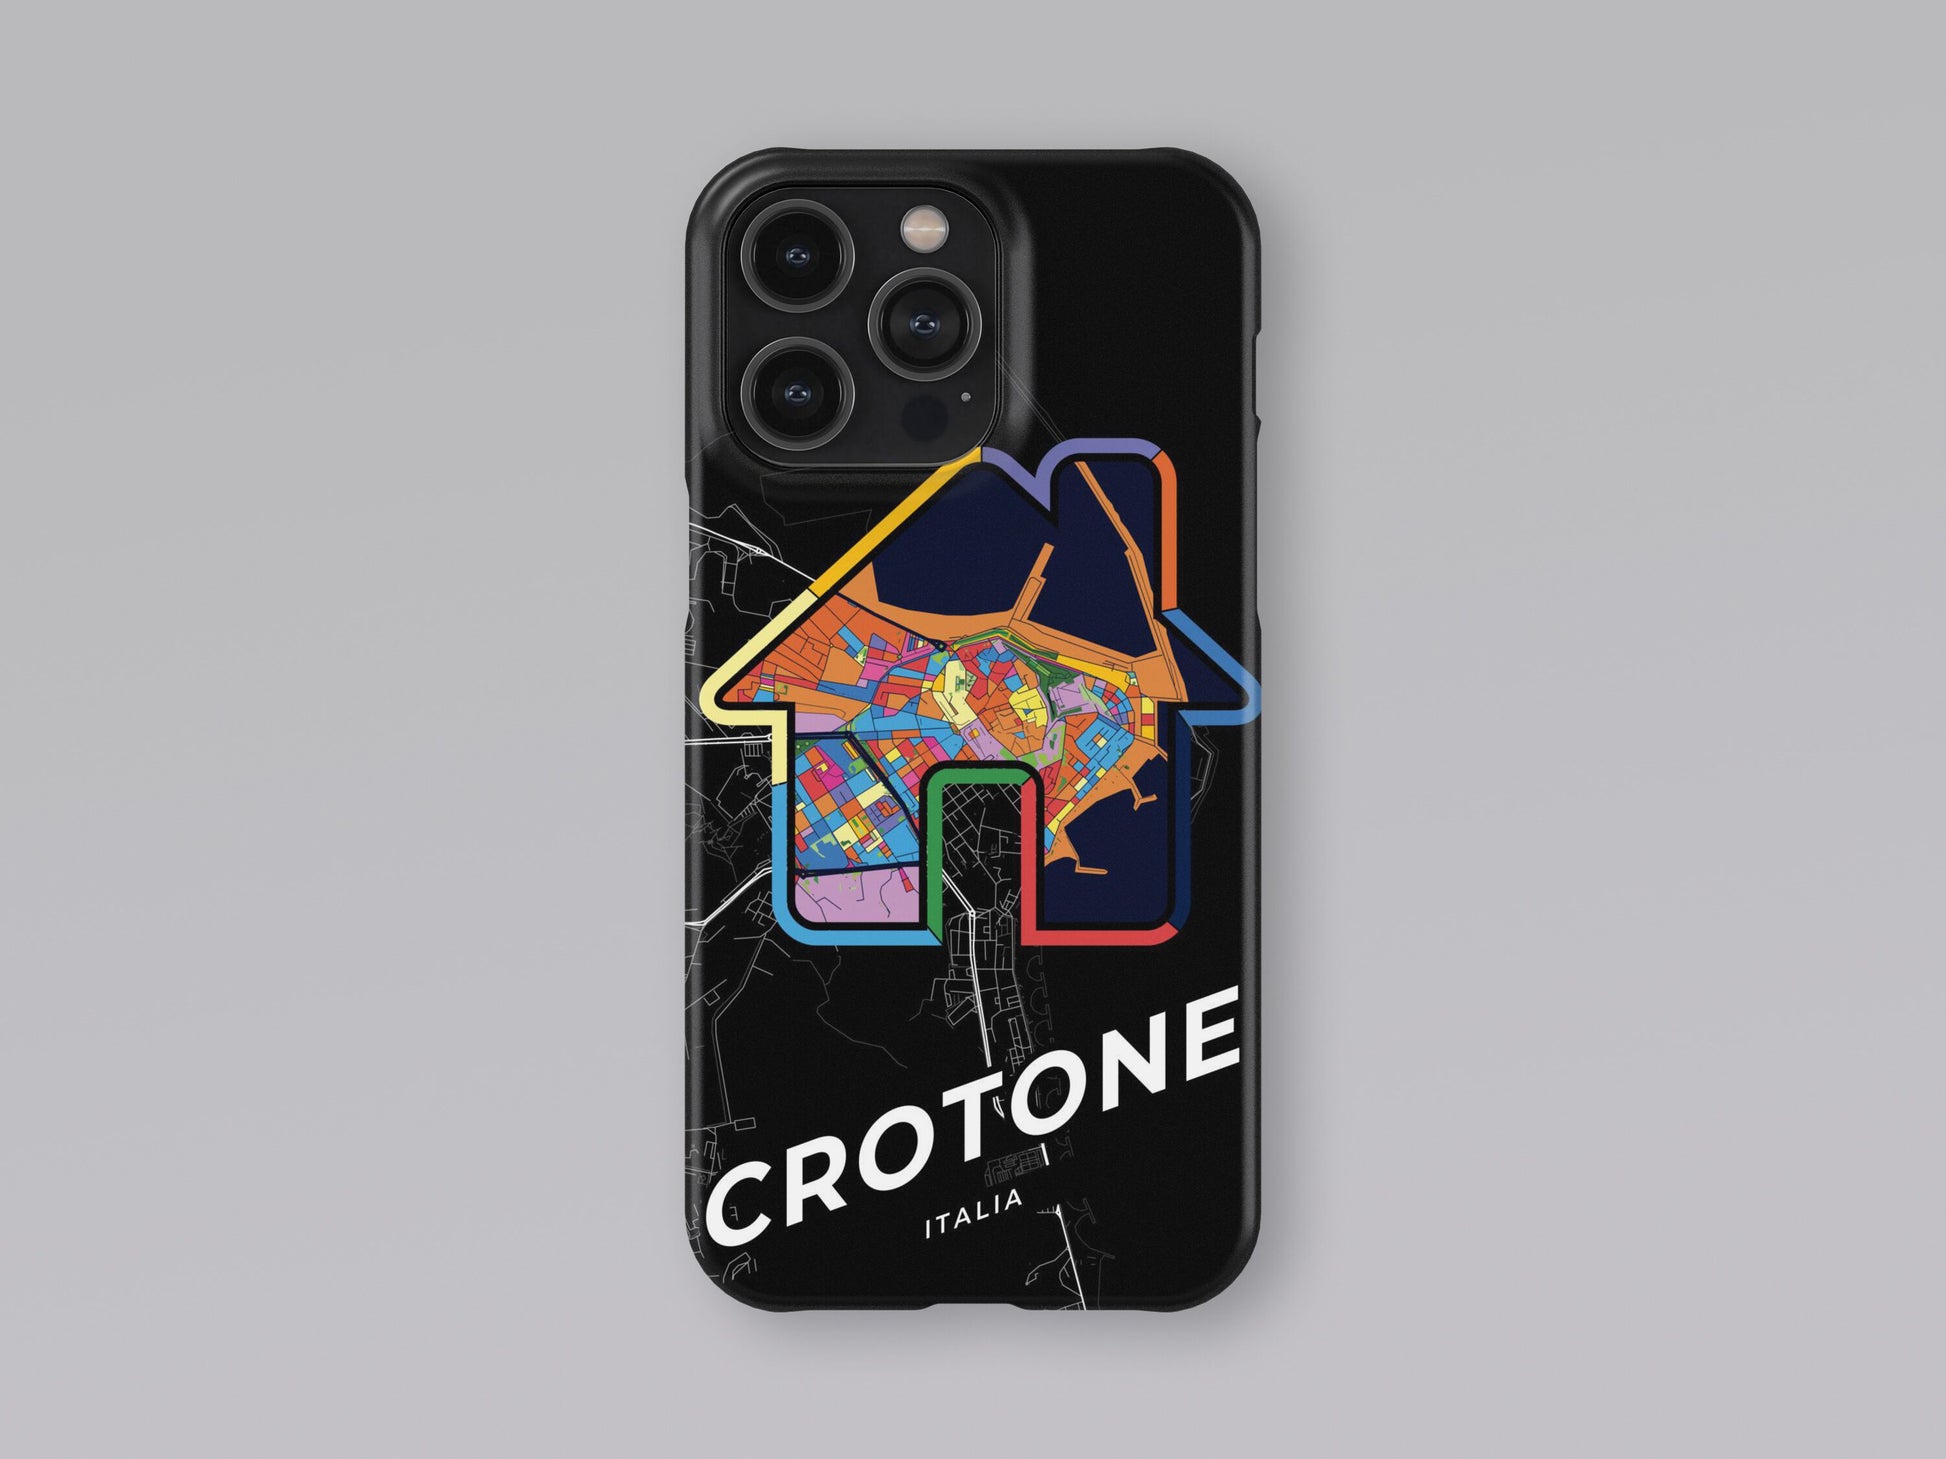 Crotone Italy slim phone case with colorful icon. Birthday, wedding or housewarming gift. Couple match cases. 3